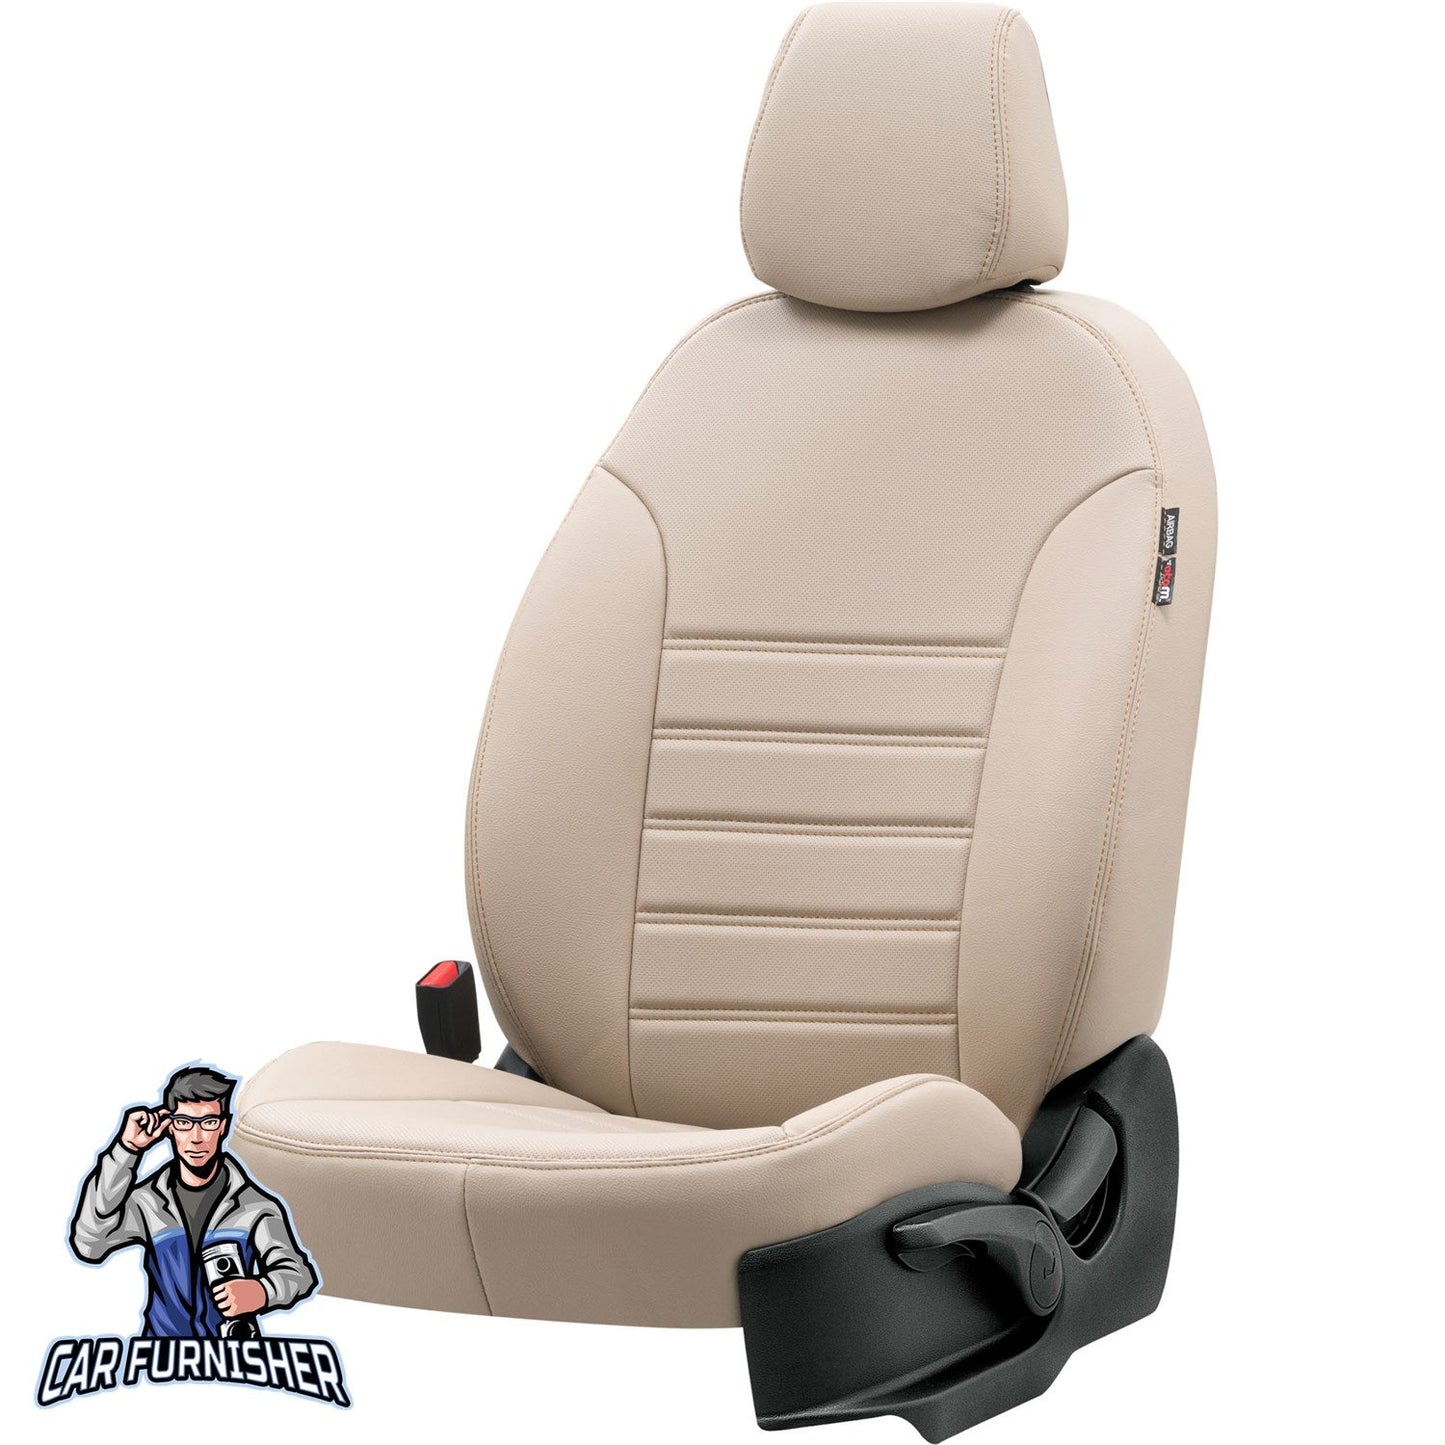 Kia Opirus Seat Covers Istanbul Leather Design Beige Leather